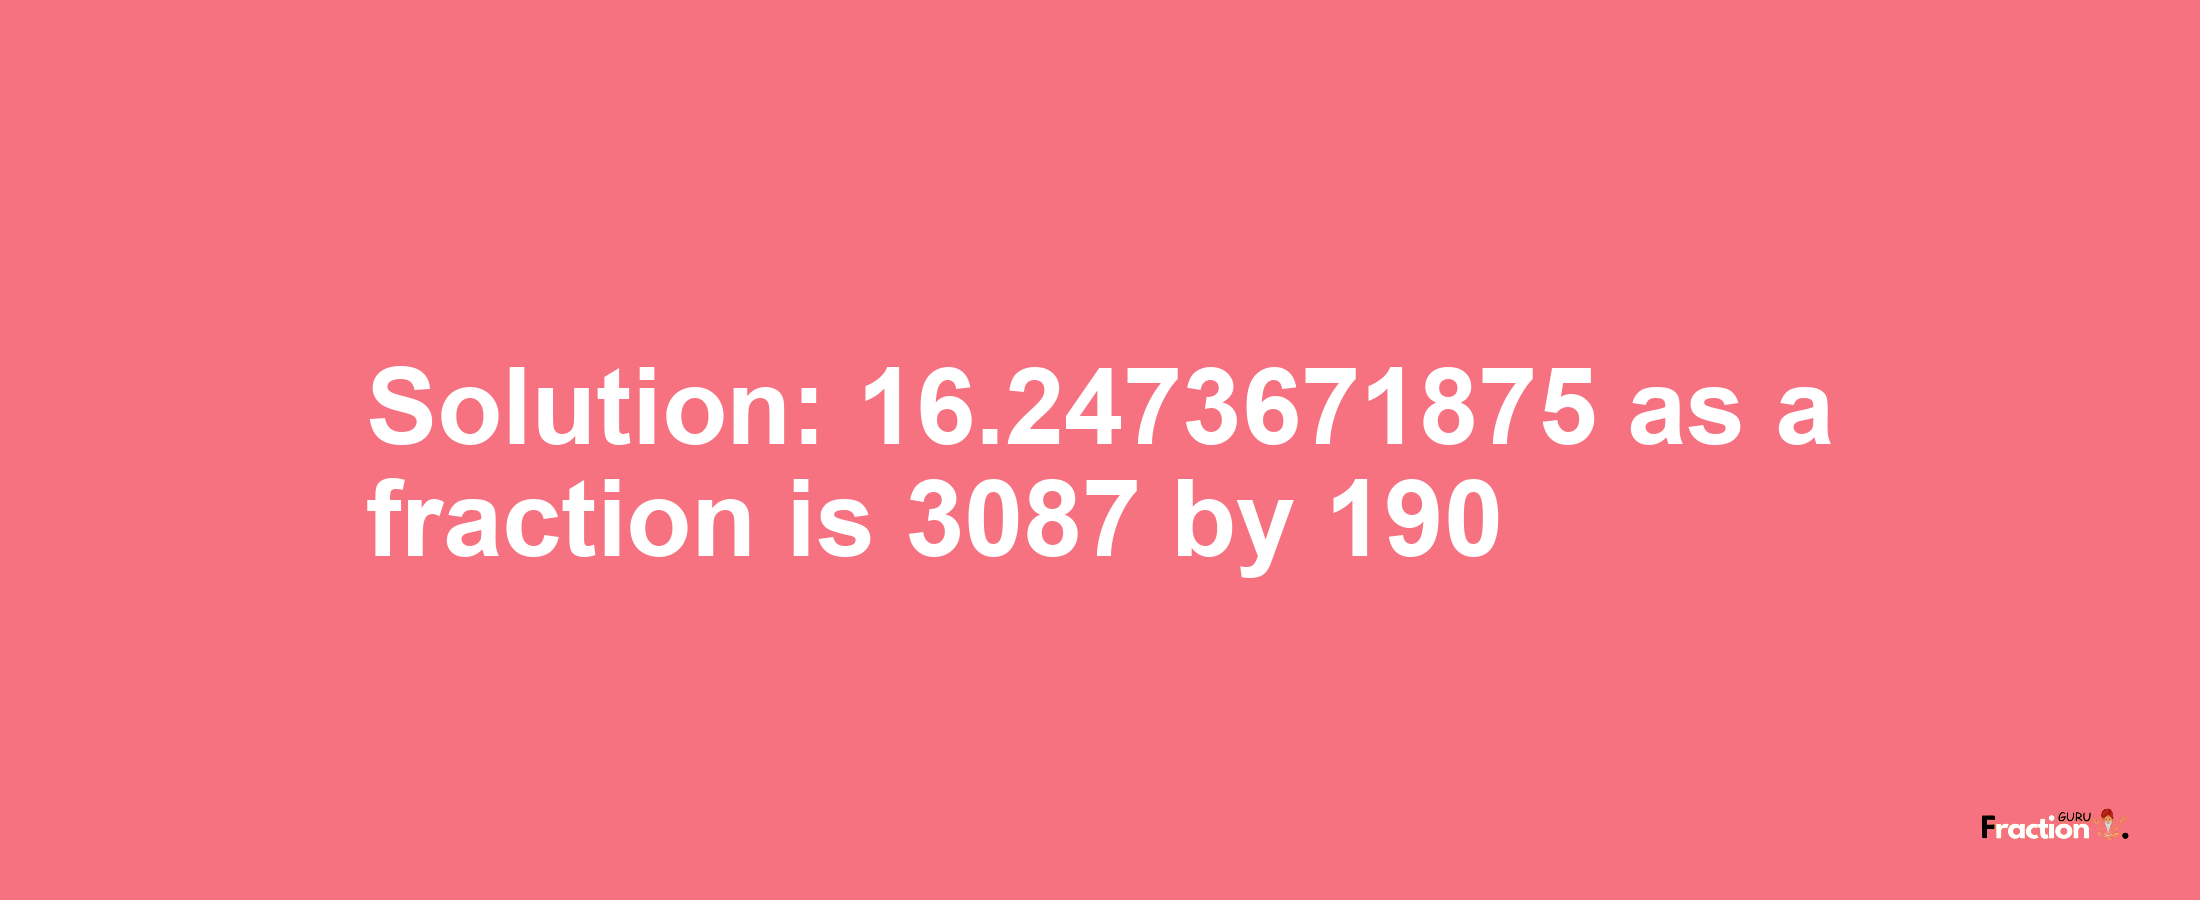 Solution:16.2473671875 as a fraction is 3087/190